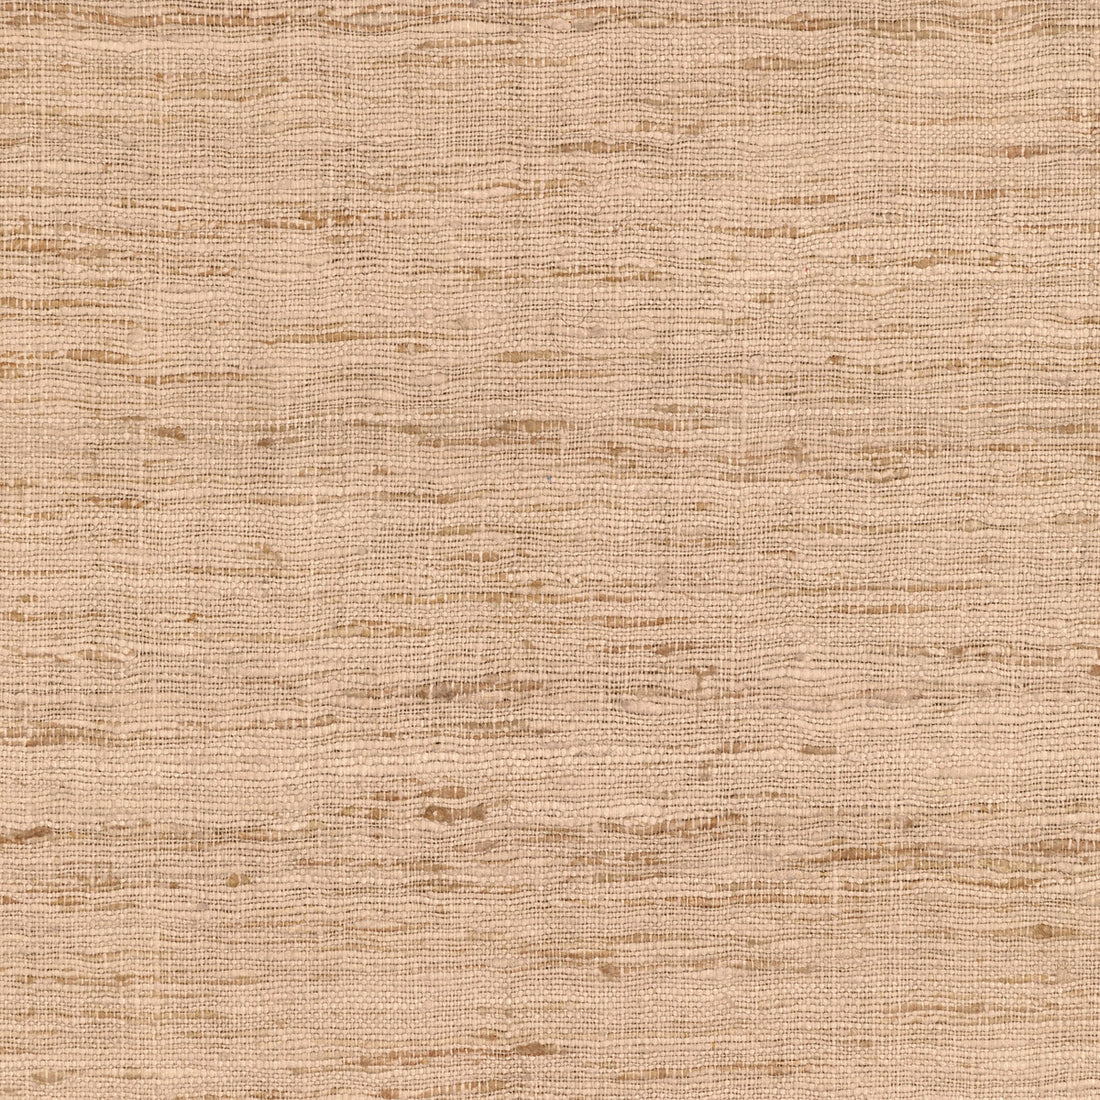 Sonoma fabric in faded terracotta color - pattern GWF-3109.112.0 - by Lee Jofa Modern in the Kelly Wearstler VI collection